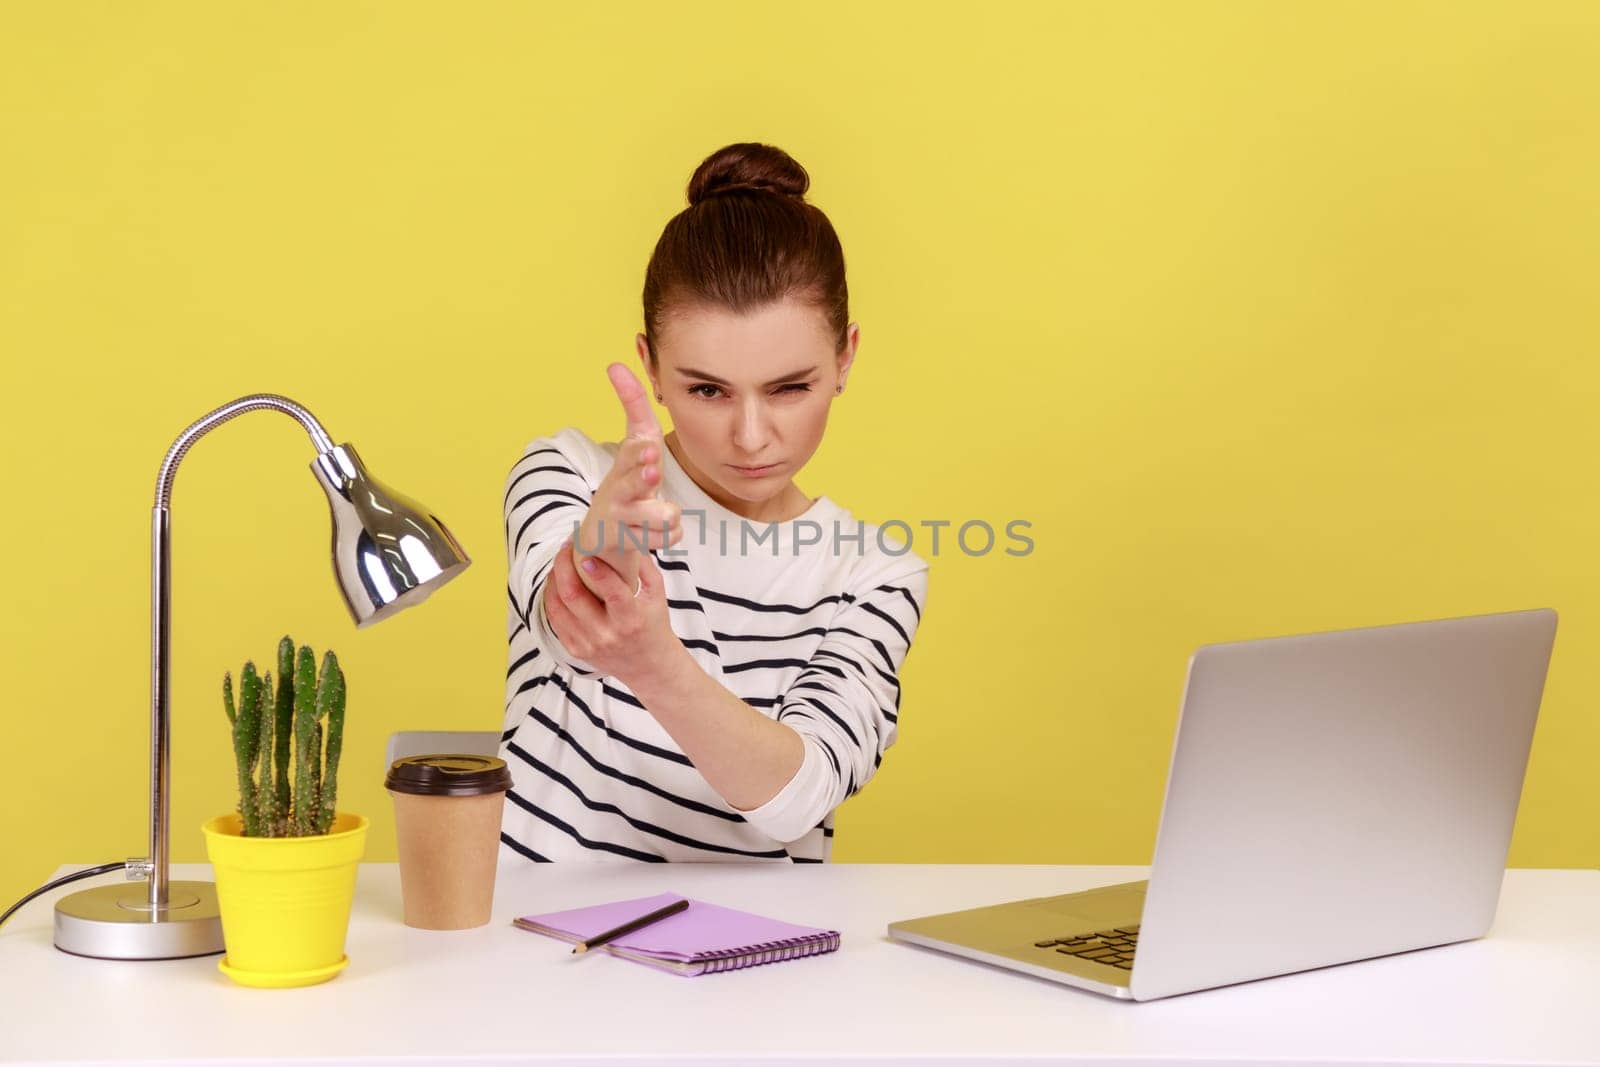 Angry woman office worker sitting at workplace with laptop threatening and pointing finger gun to camera, shooting with aggressive expression. Indoor studio studio shot isolated on yellow background.